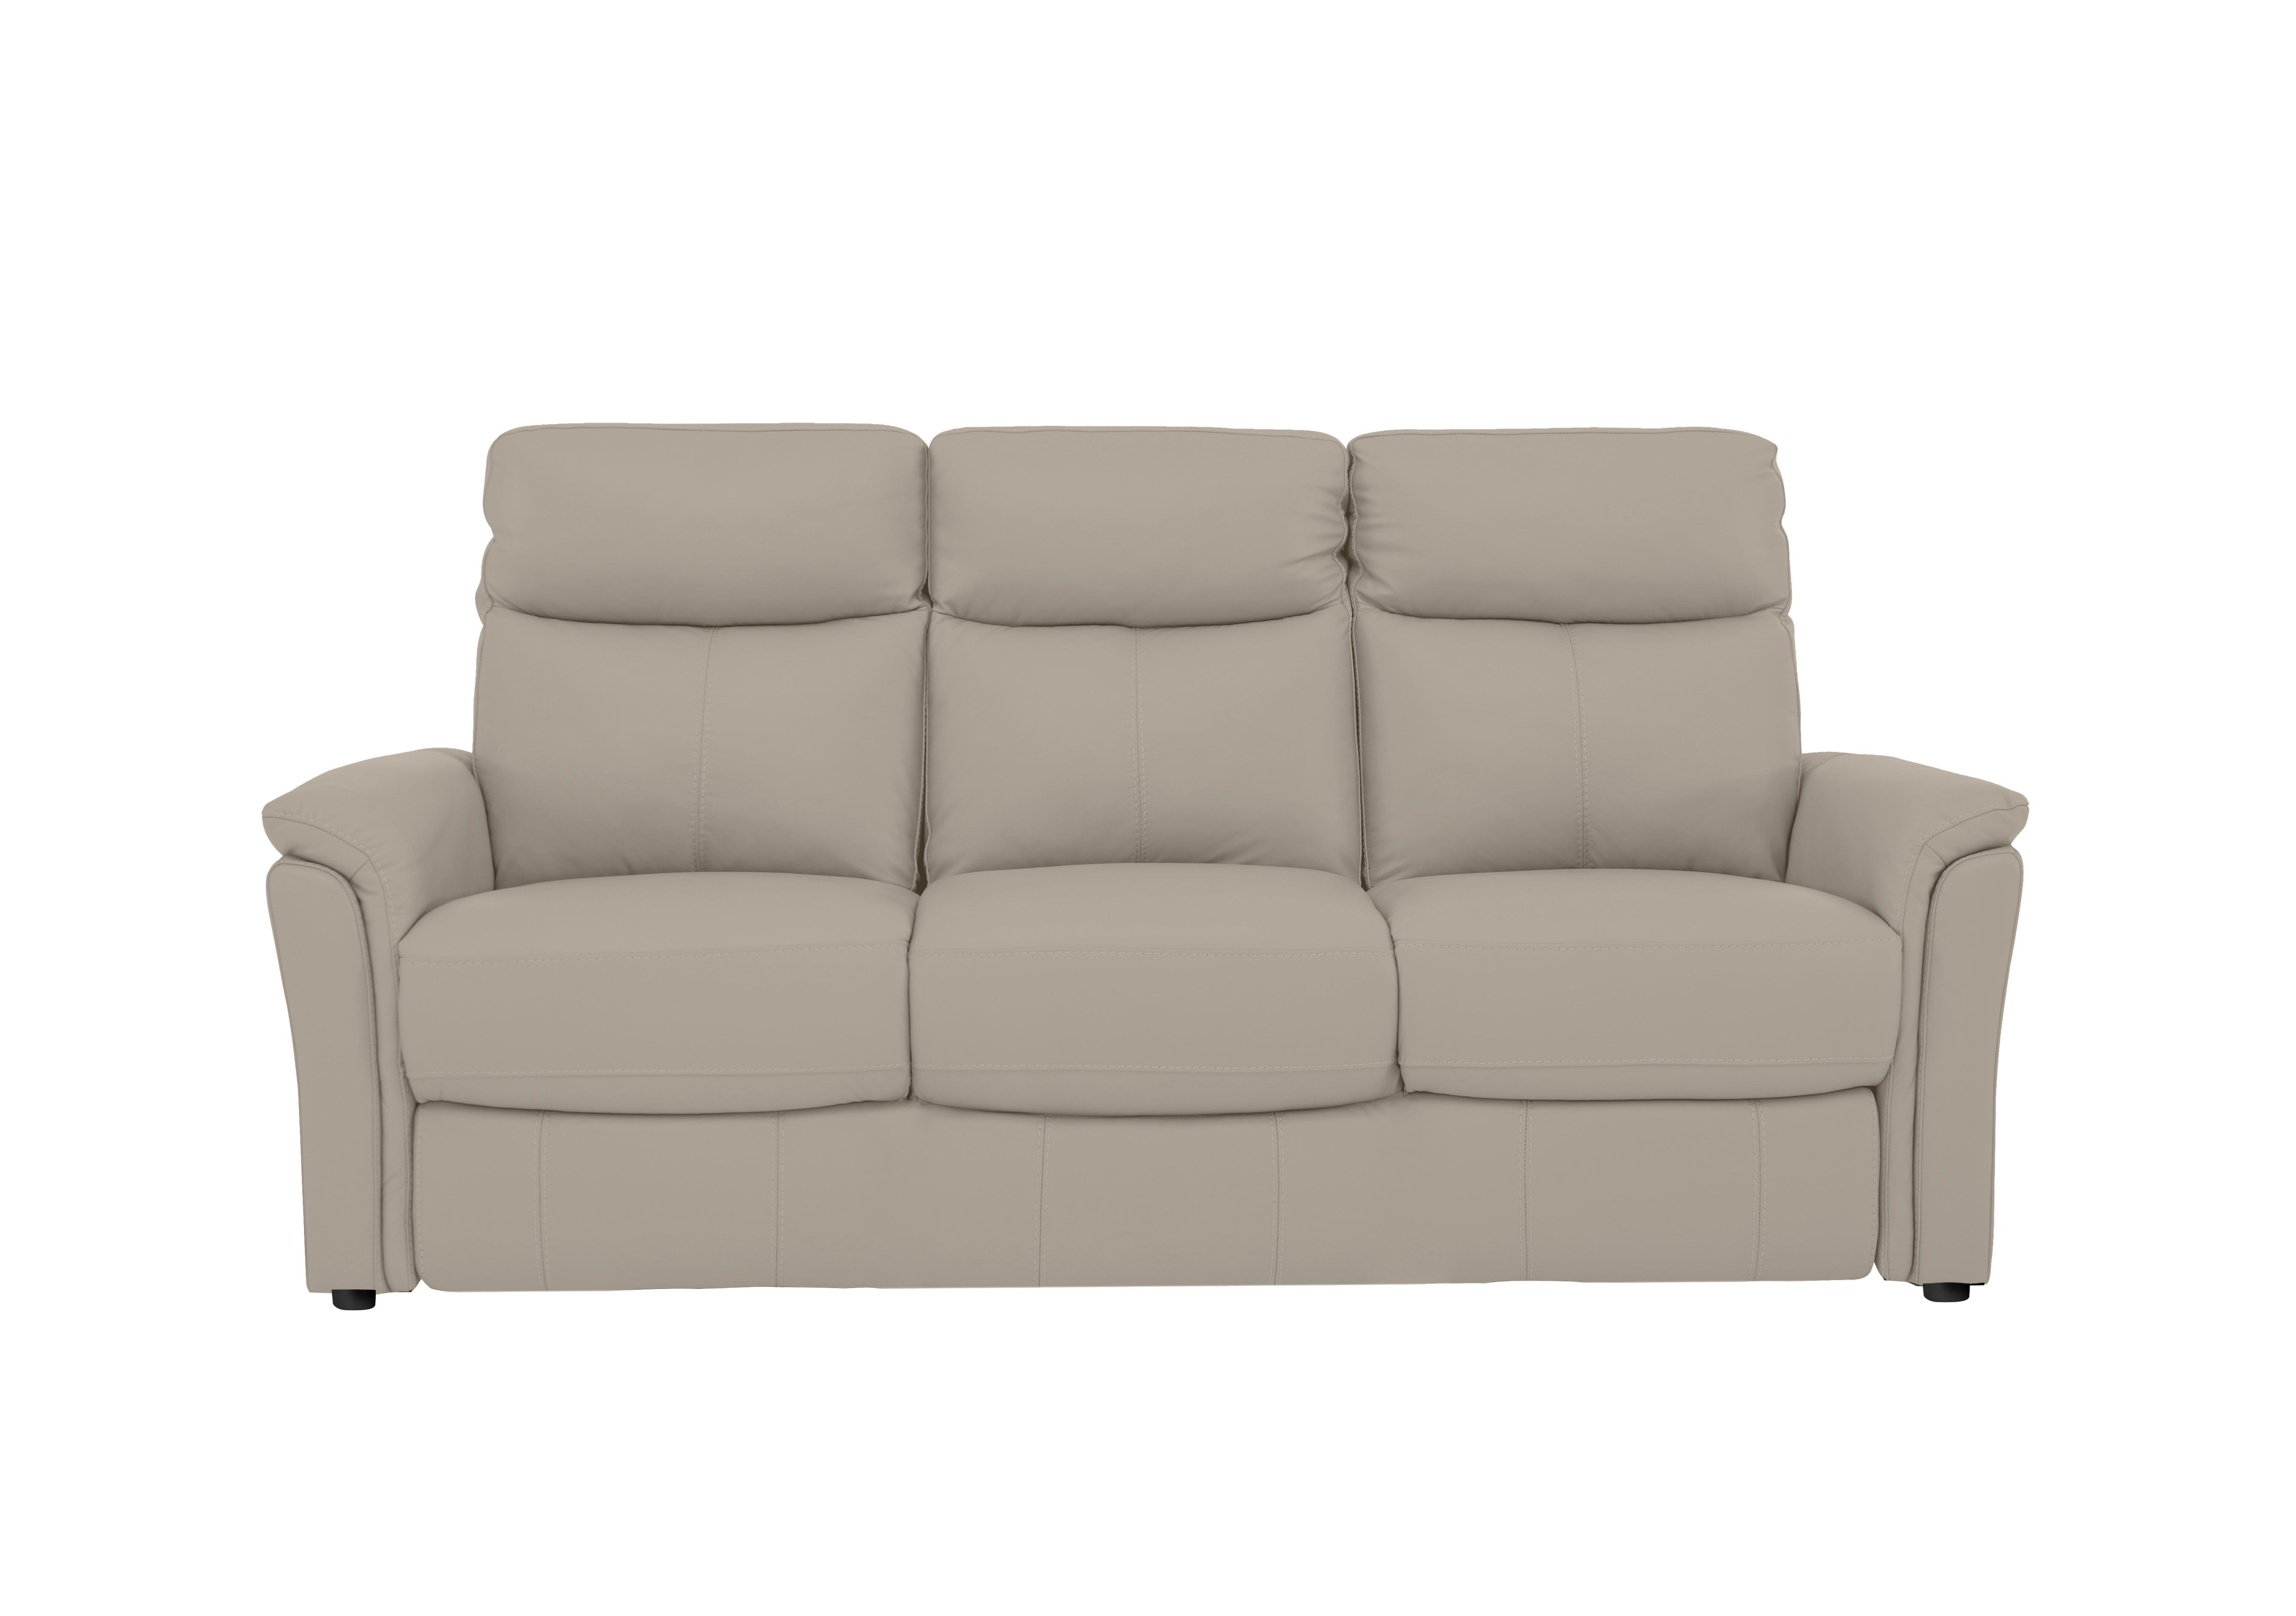 Compact Collection Piccolo 3 Seater Leather Static Sofa in Bv-946b Silver Grey on Furniture Village